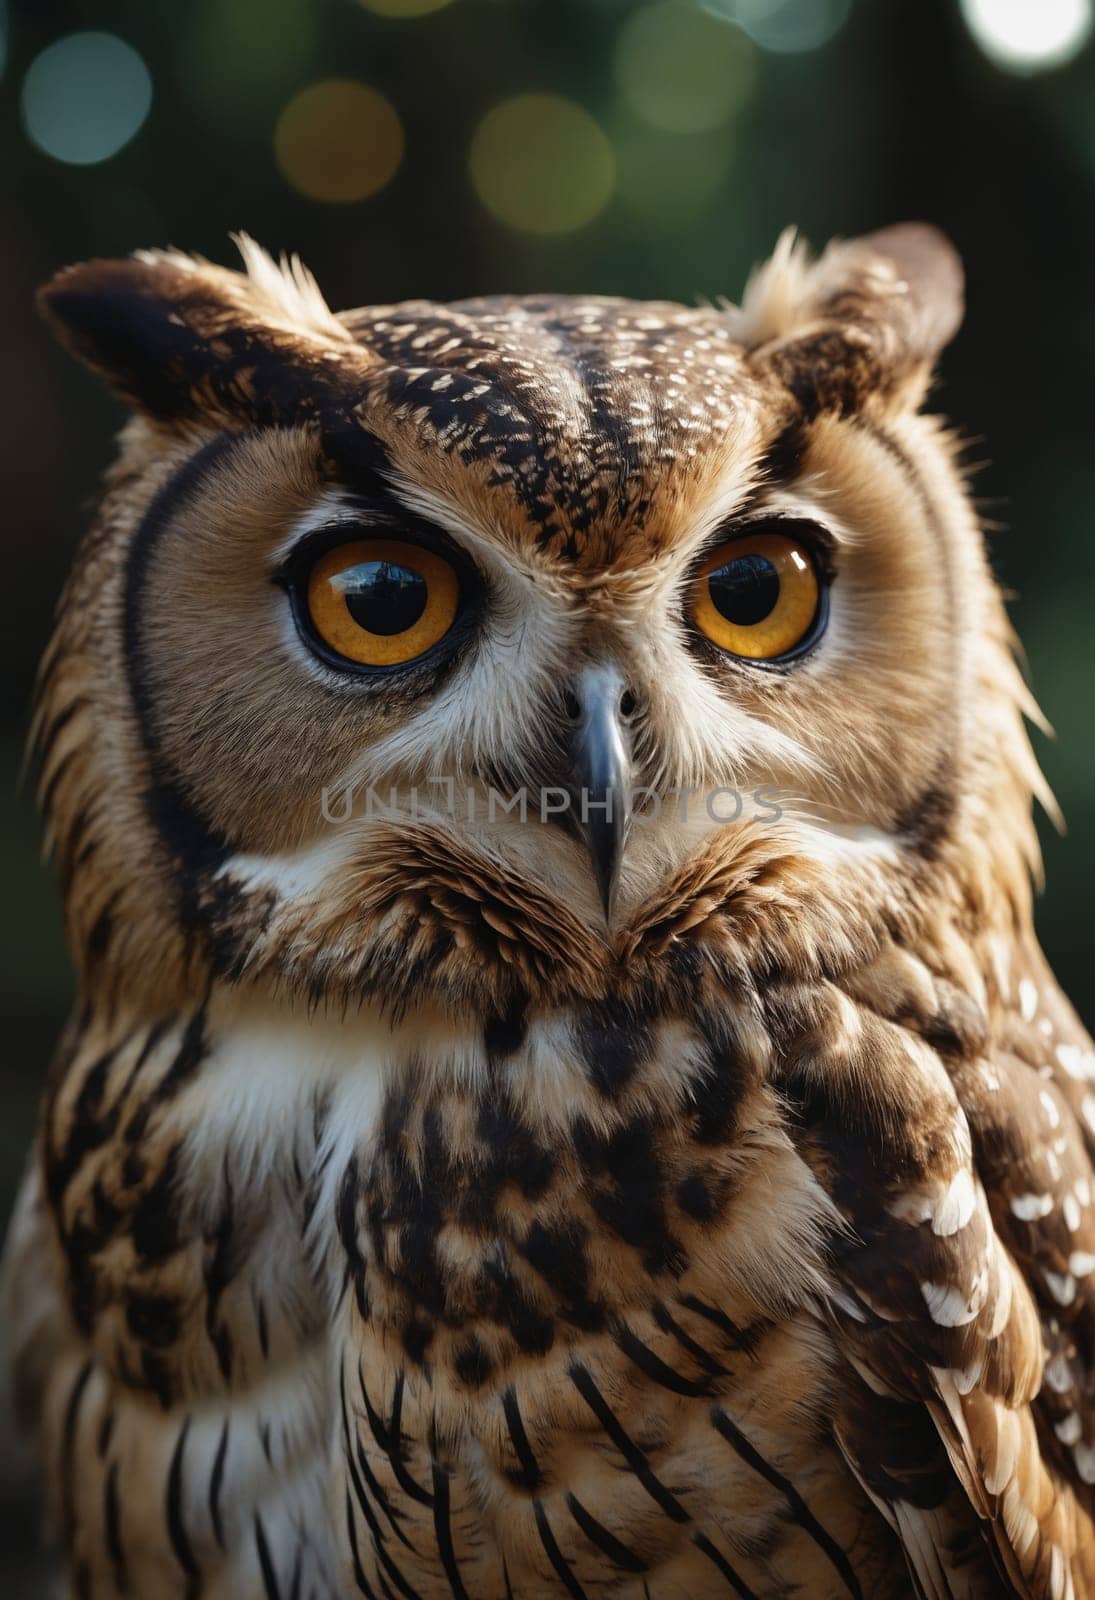 An intimate portrait of an owl at night, its feathery texture enhanced by the bokeh lights in the backdrop.